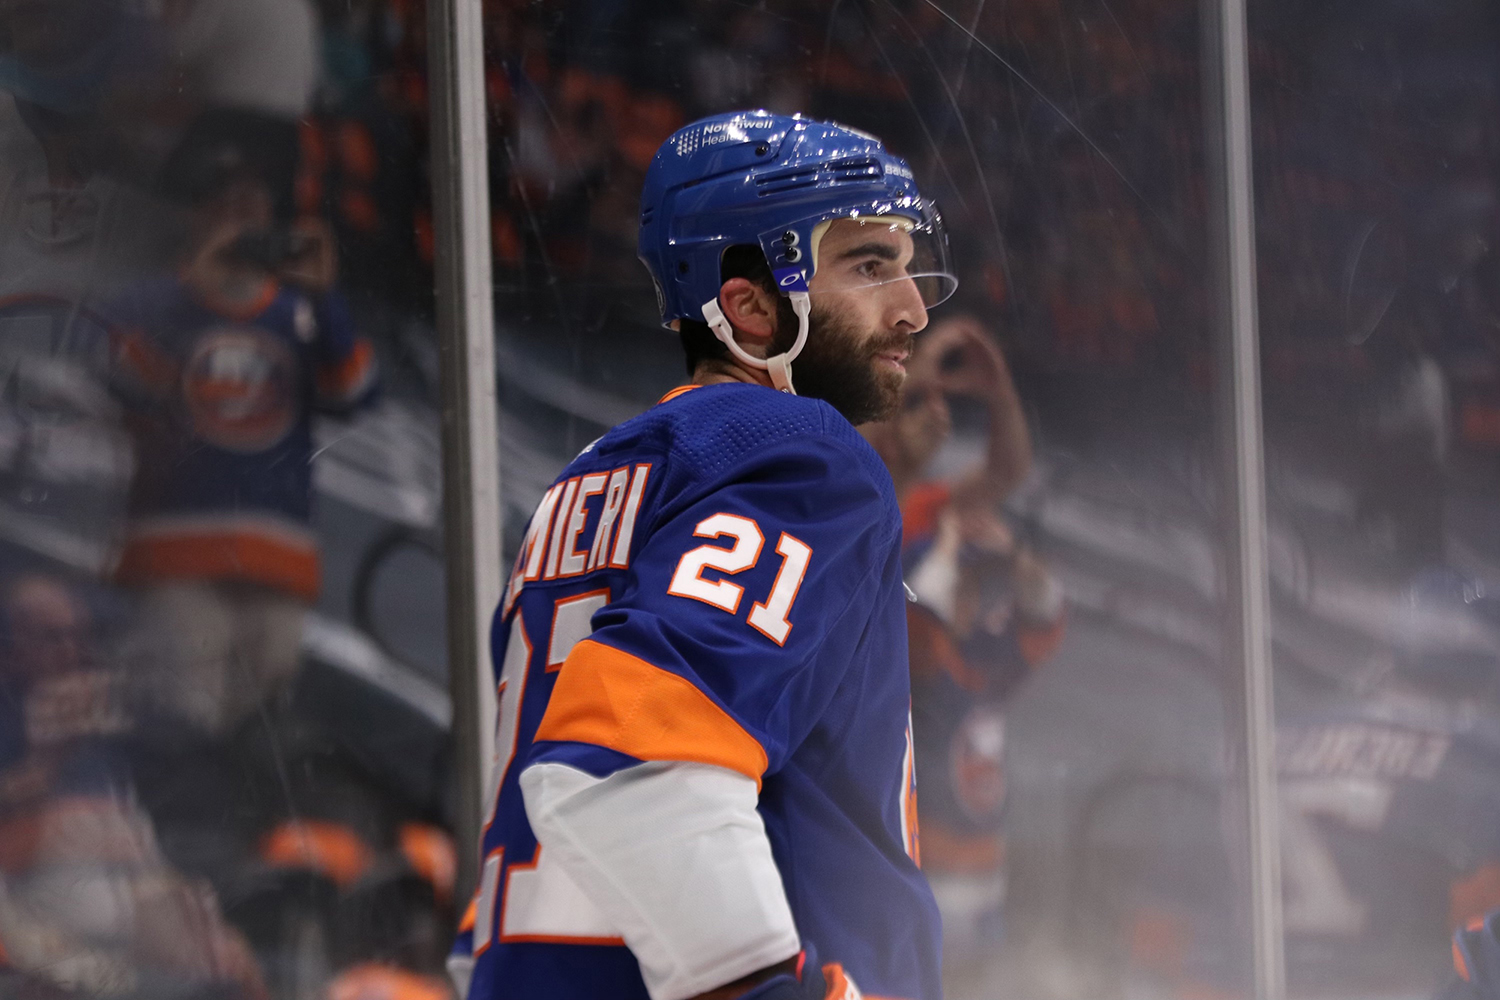 New Jersey Devils: Kyle Palmieri In The All Star Game!